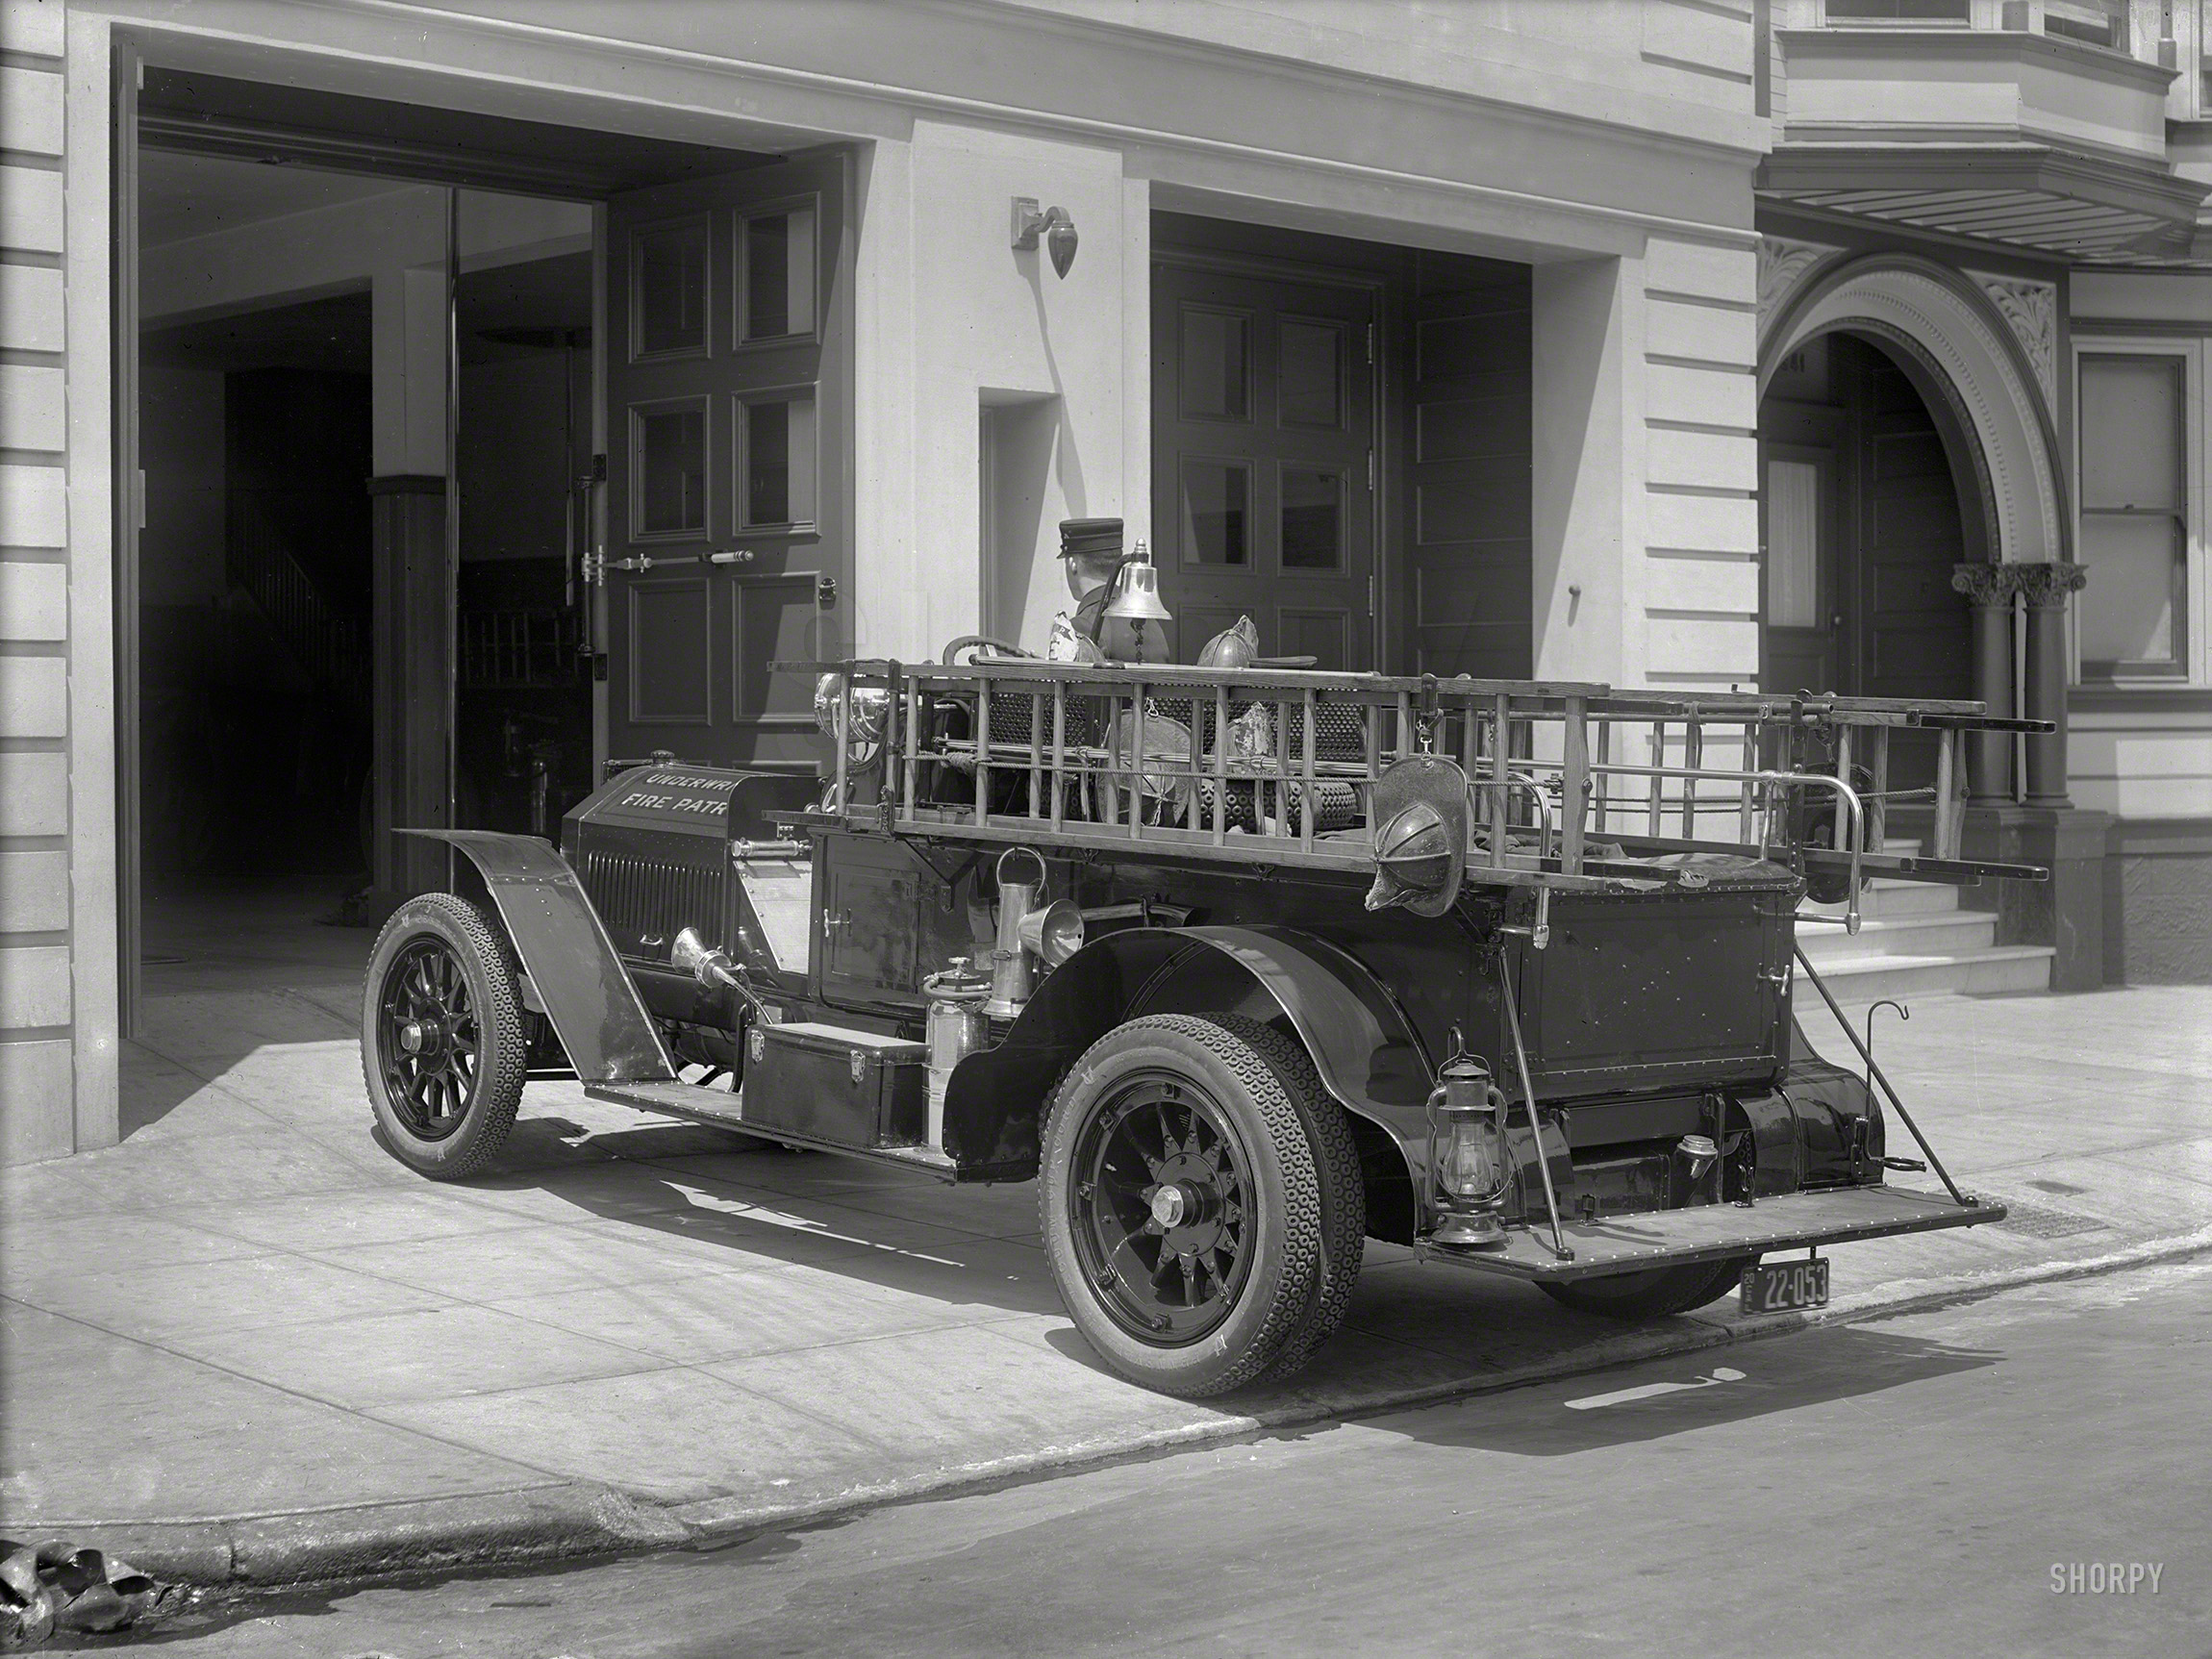 San Francisco, 1920. "Underwriters Fire Patrol truck." 5x7 inch glass negative by Christopher Helin. View full size.